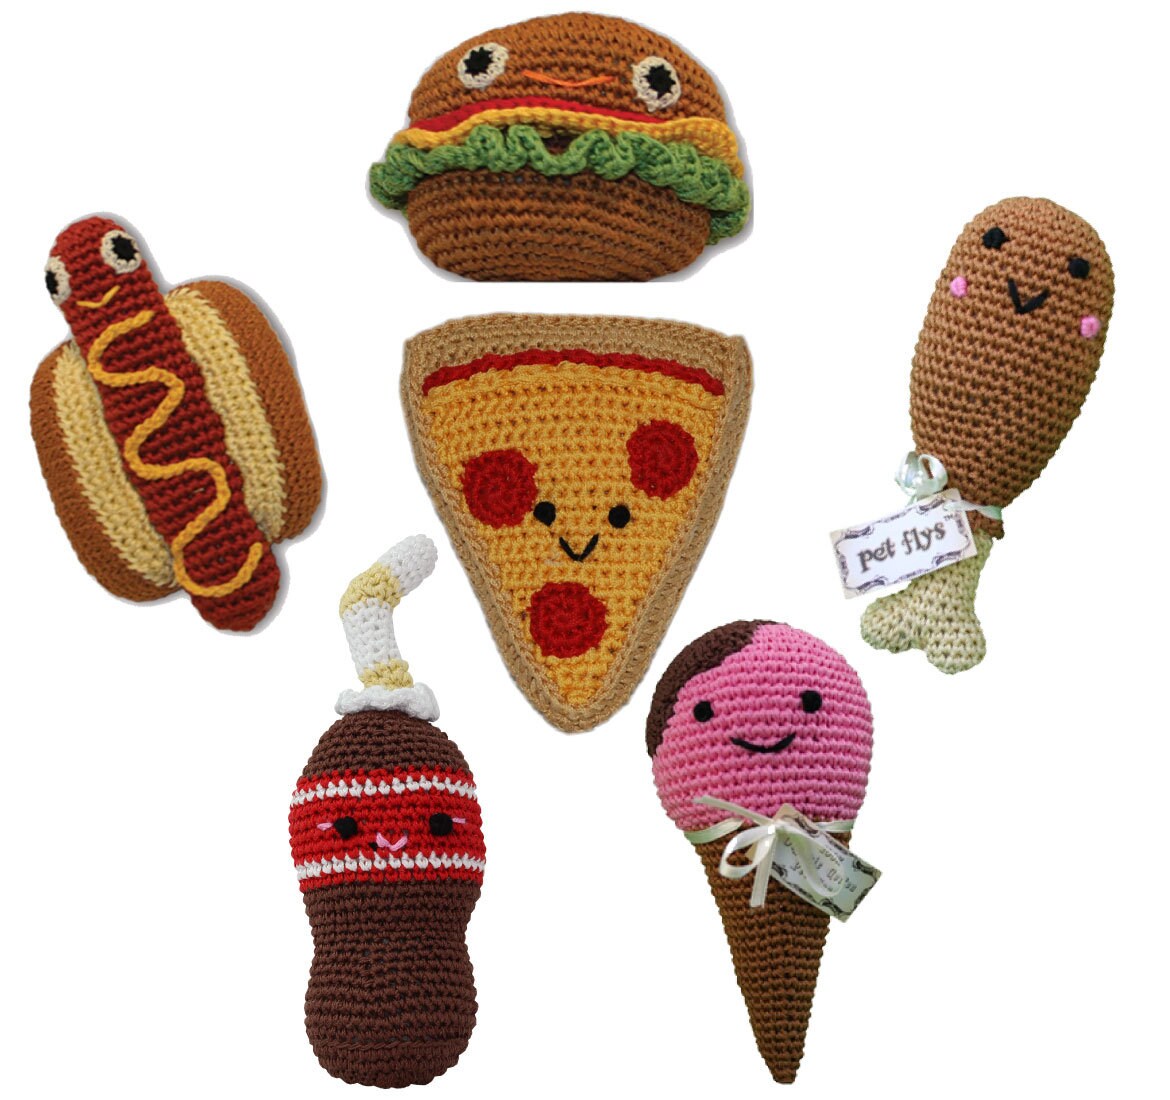 Knit Knacks Organic Cotton Pet & Dog Toys, "Food Collection" (Choose from: Hamburger, Hot Dog, Drumstick, Pizza, Soda, or Ice Cream Cone)-0